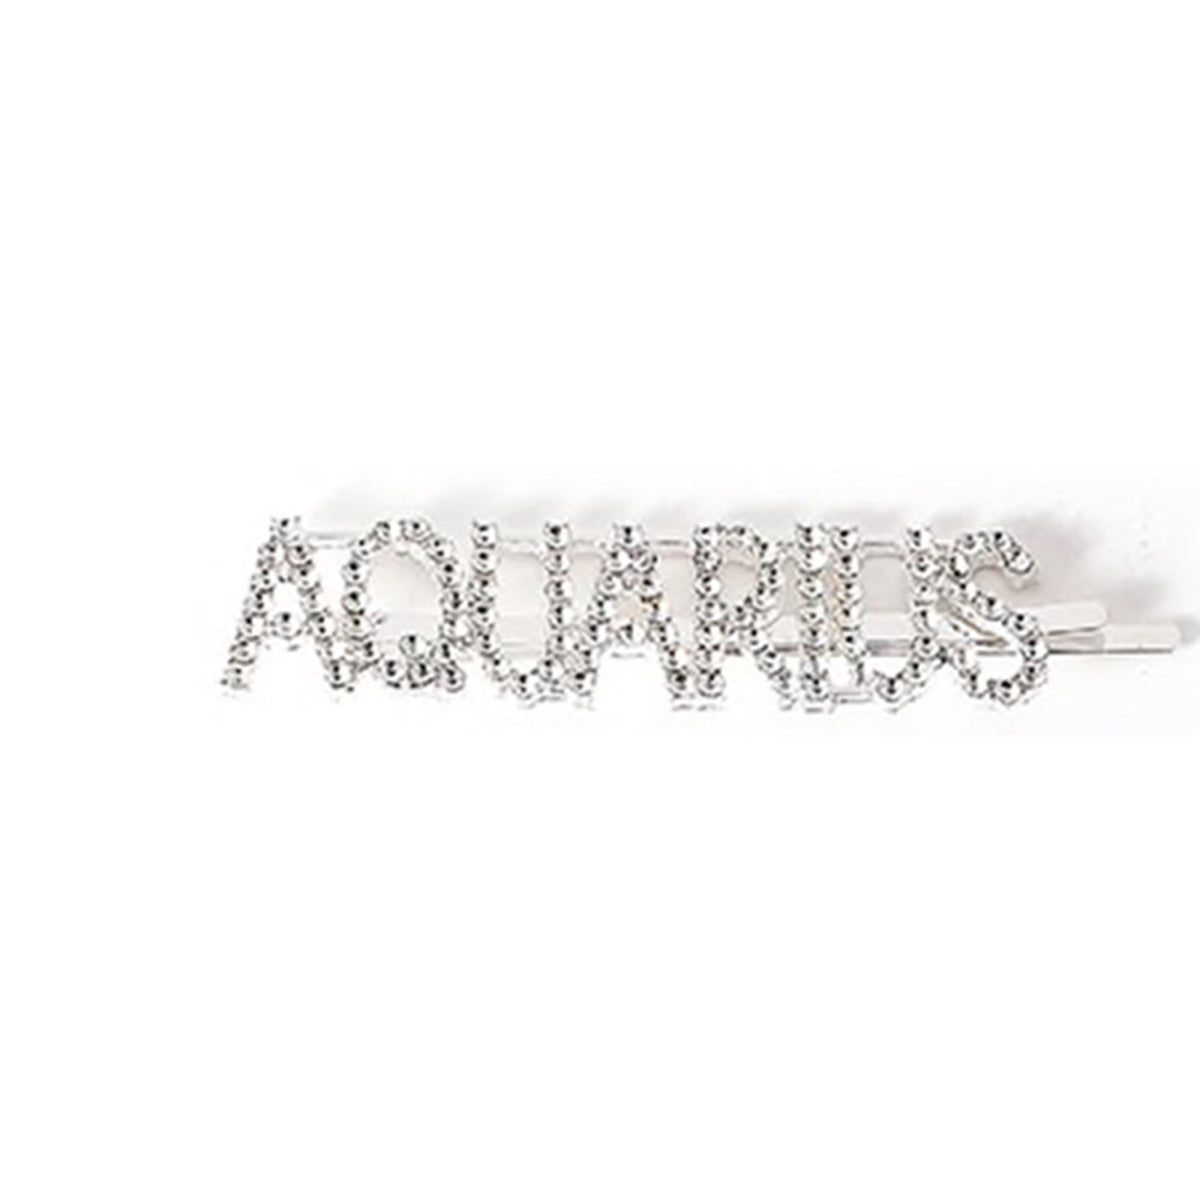 Aquarius Crystal Hair Clip zodiac jewelry for her birthday outfit